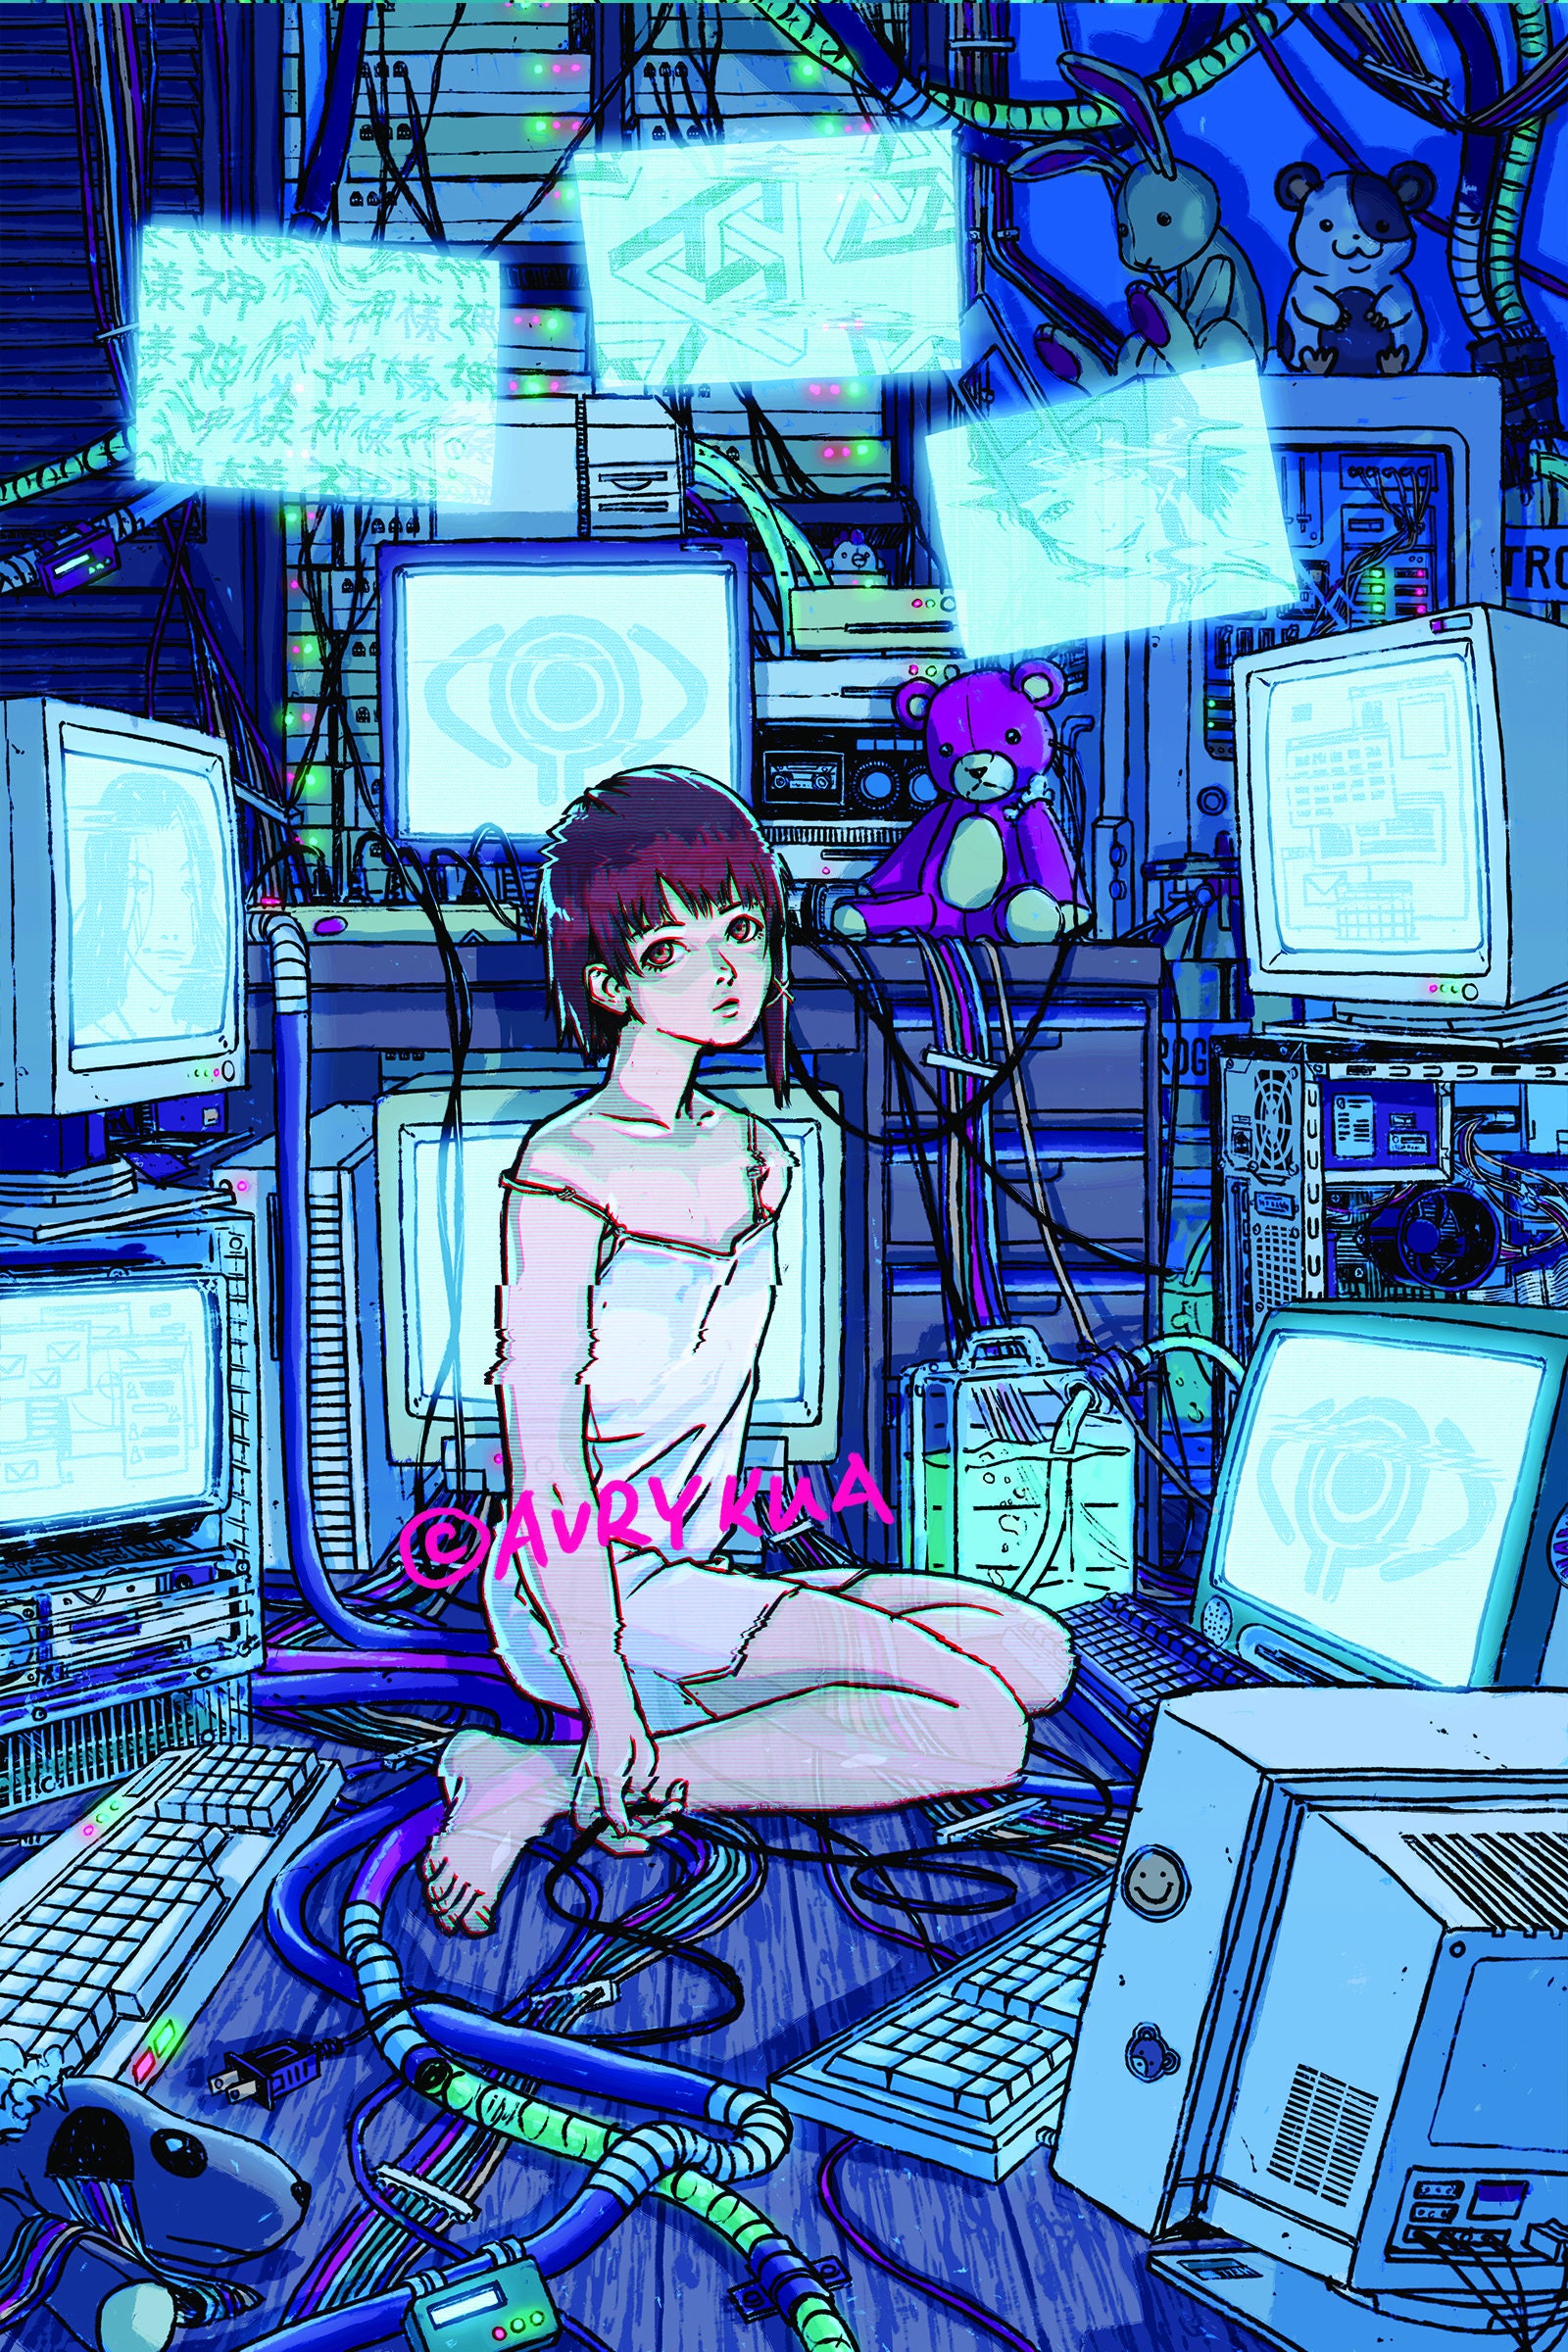  Anime Serial Experiments Lain Poster Canvas Gifts Wall